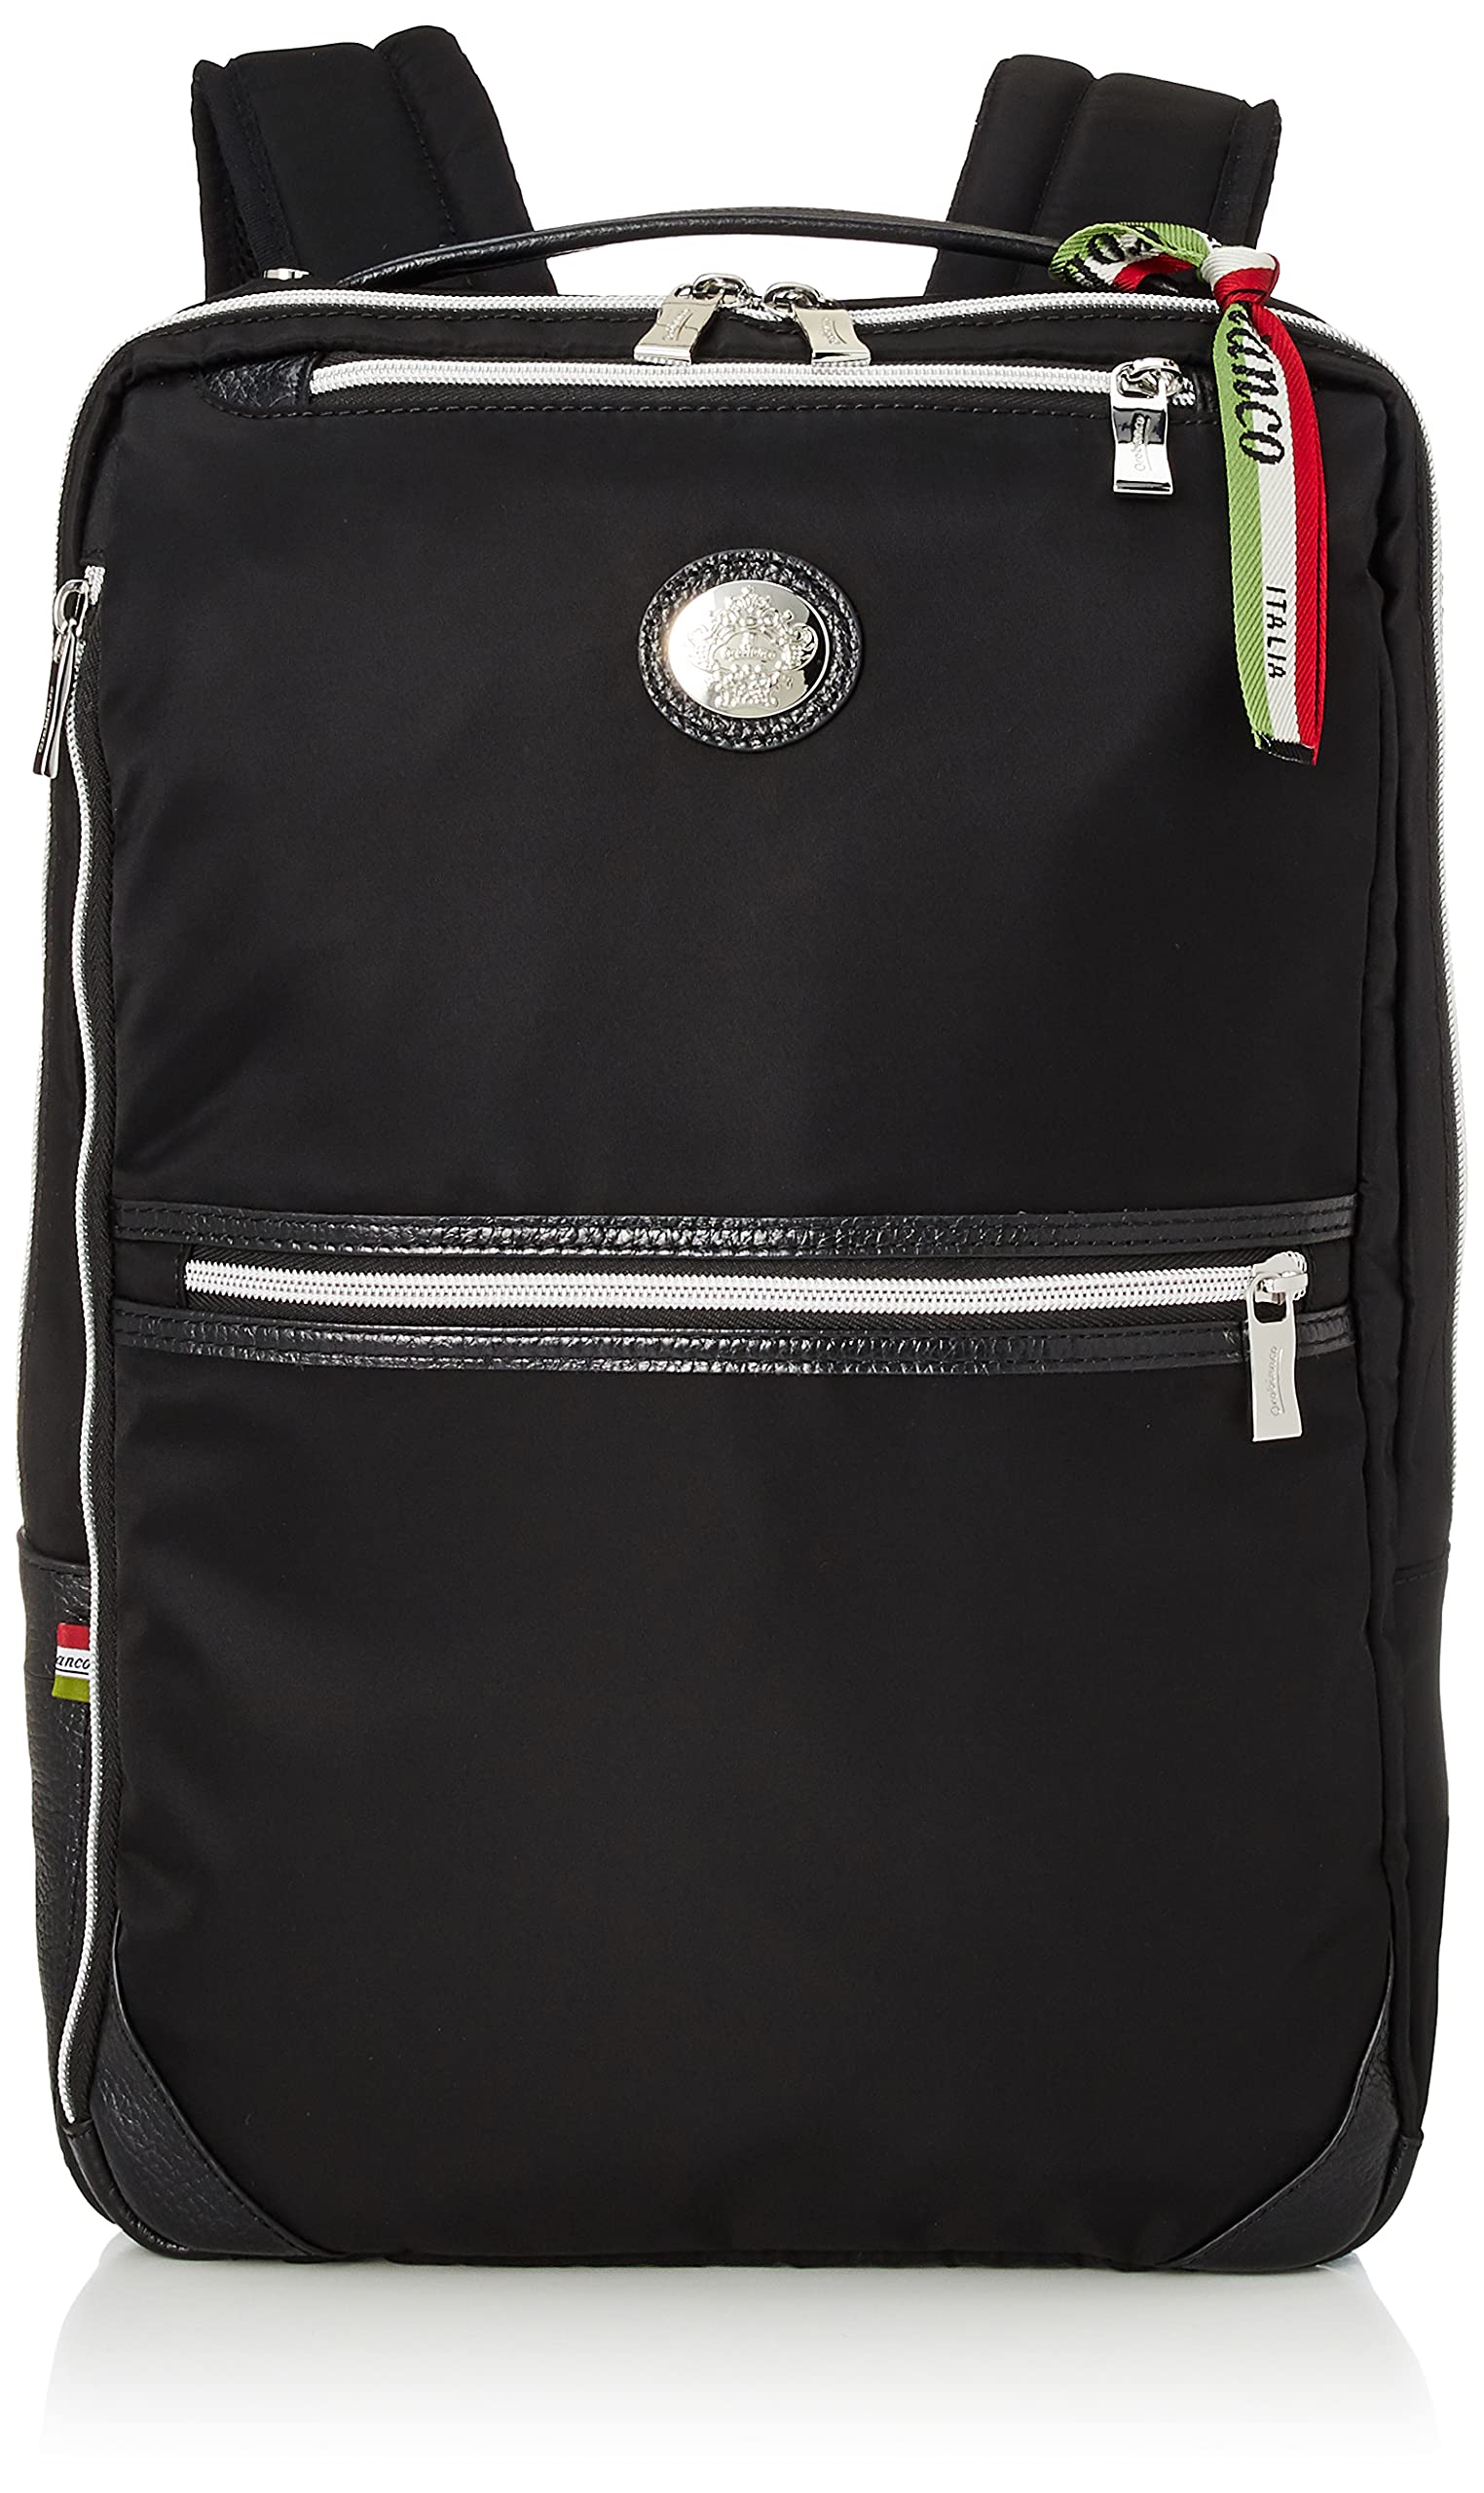 Orobianco FORTUNA Business Backpack, Genuine Product, A4 Size, 13.3-Inch Laptop Storage, Black/Black